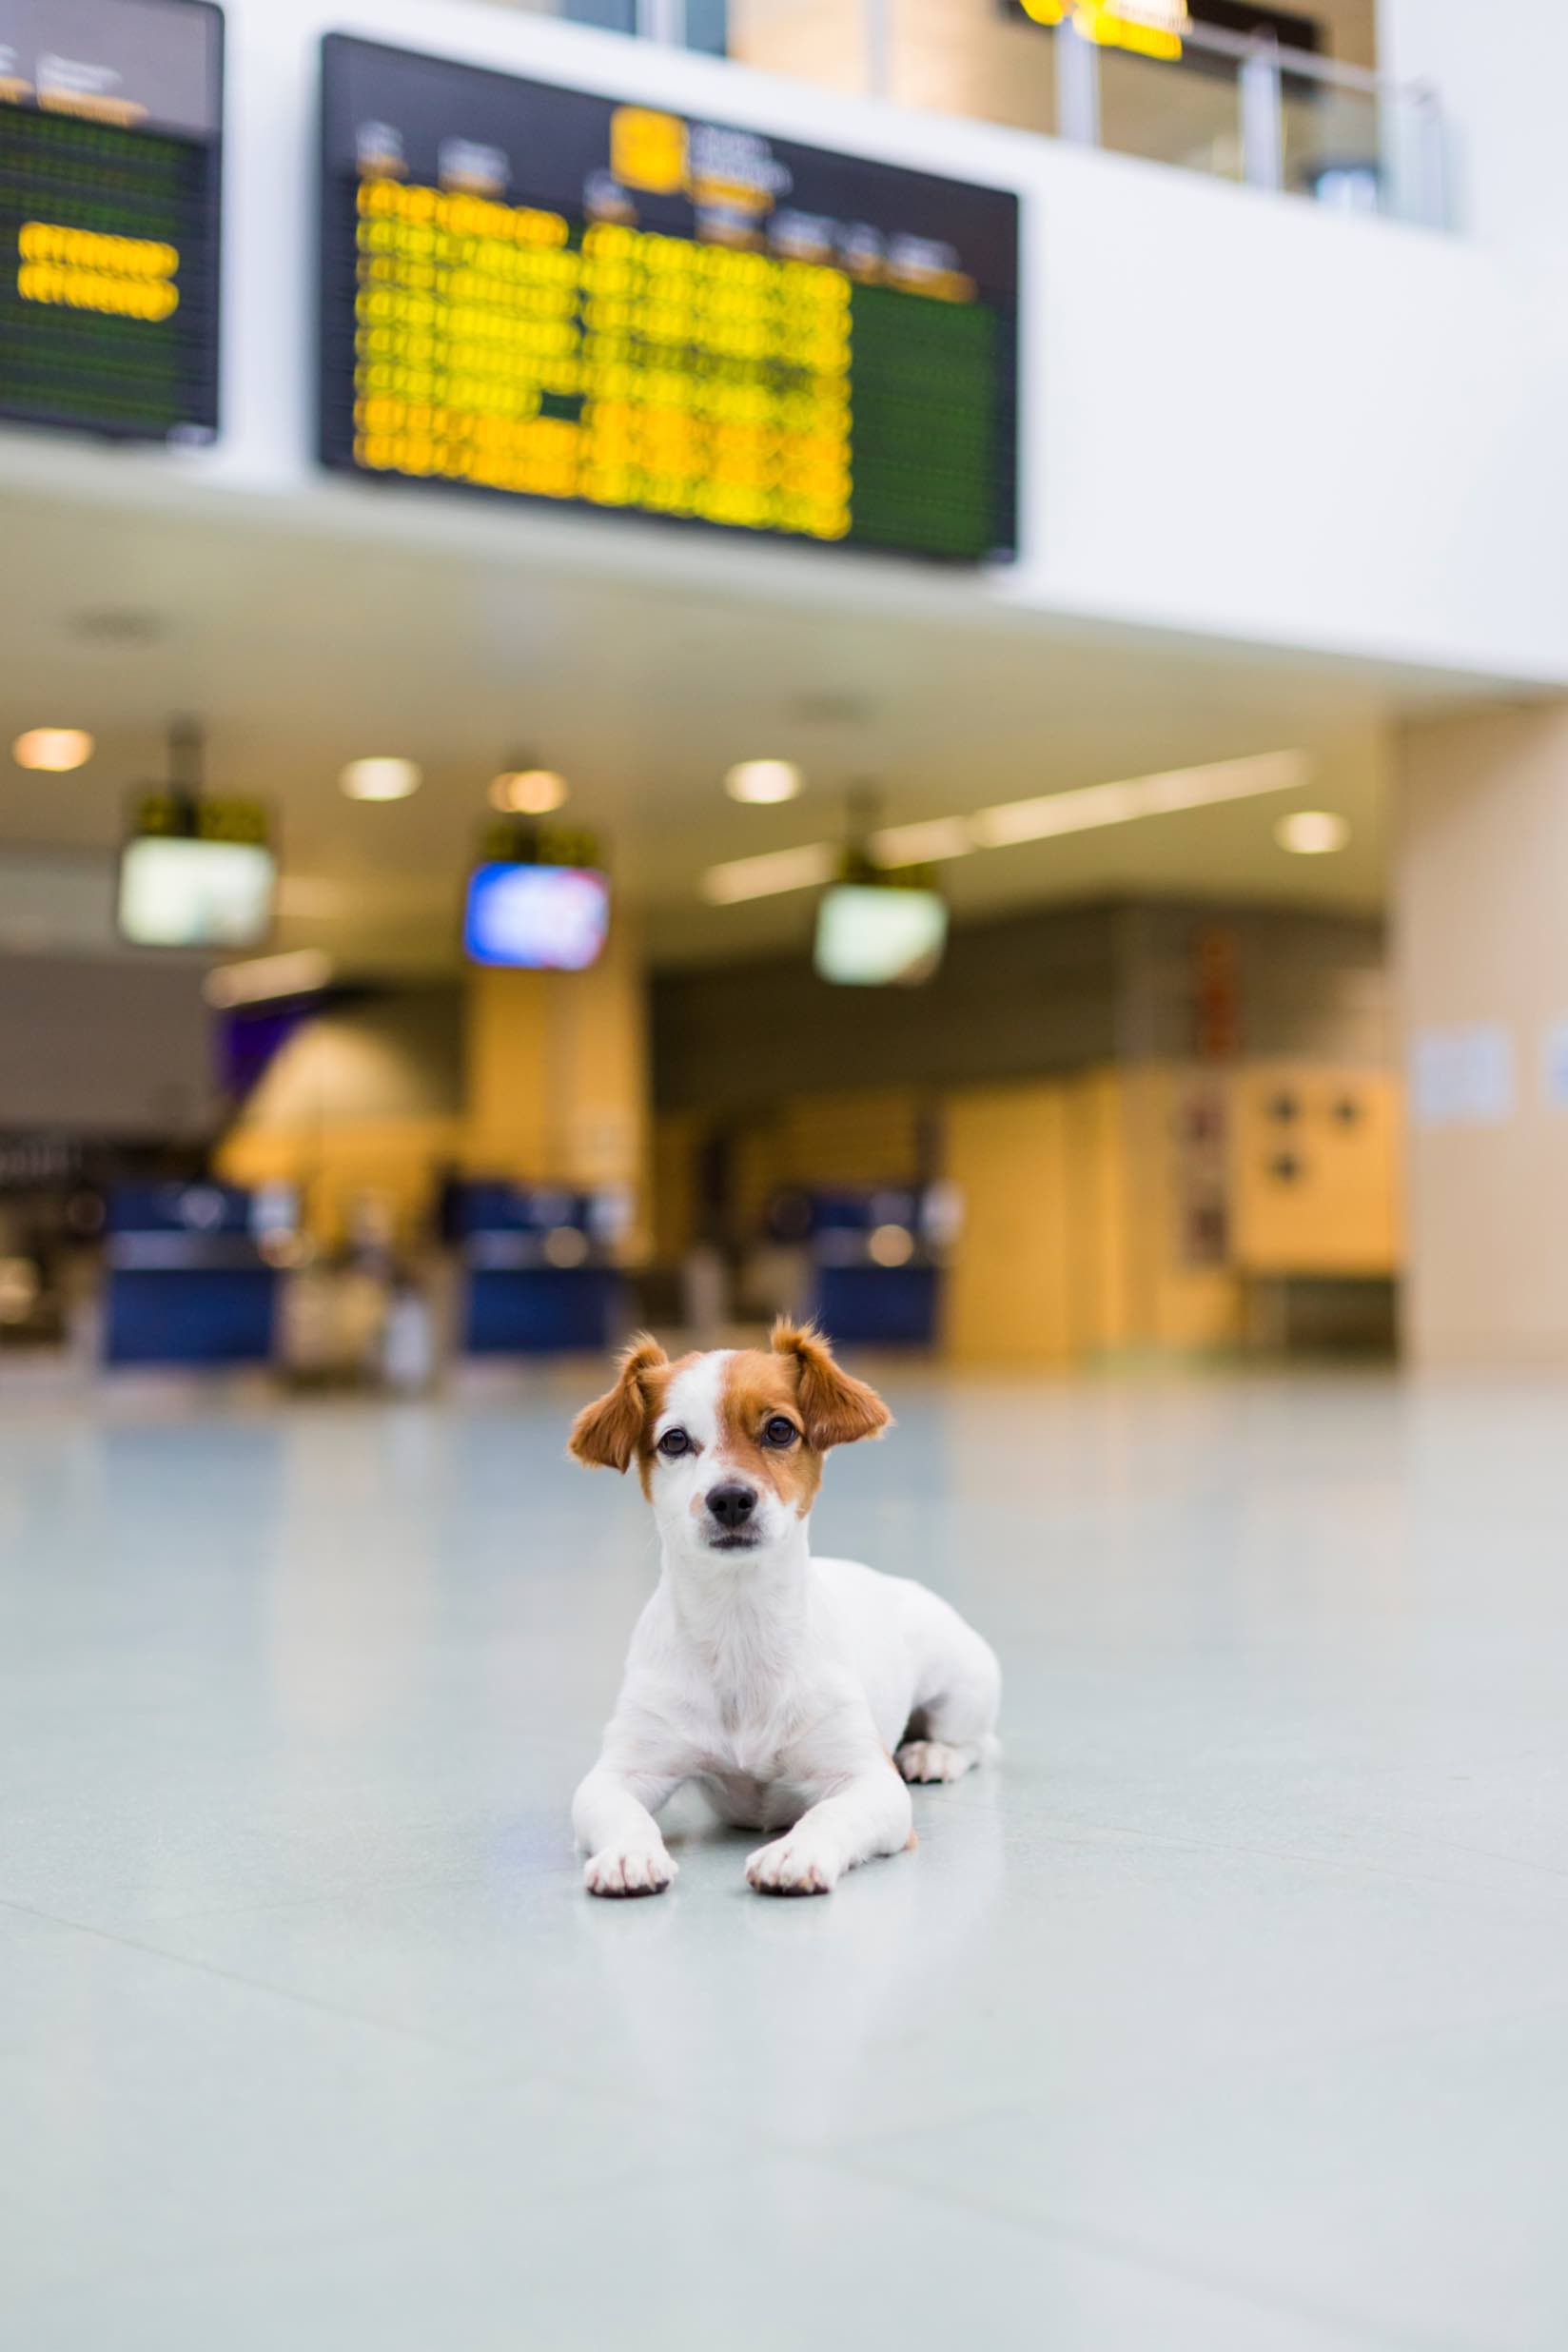 This pup is happy to behave at the airport, especially thanks to training from Dog Training Elite in Albuquerque / Santa Fe.